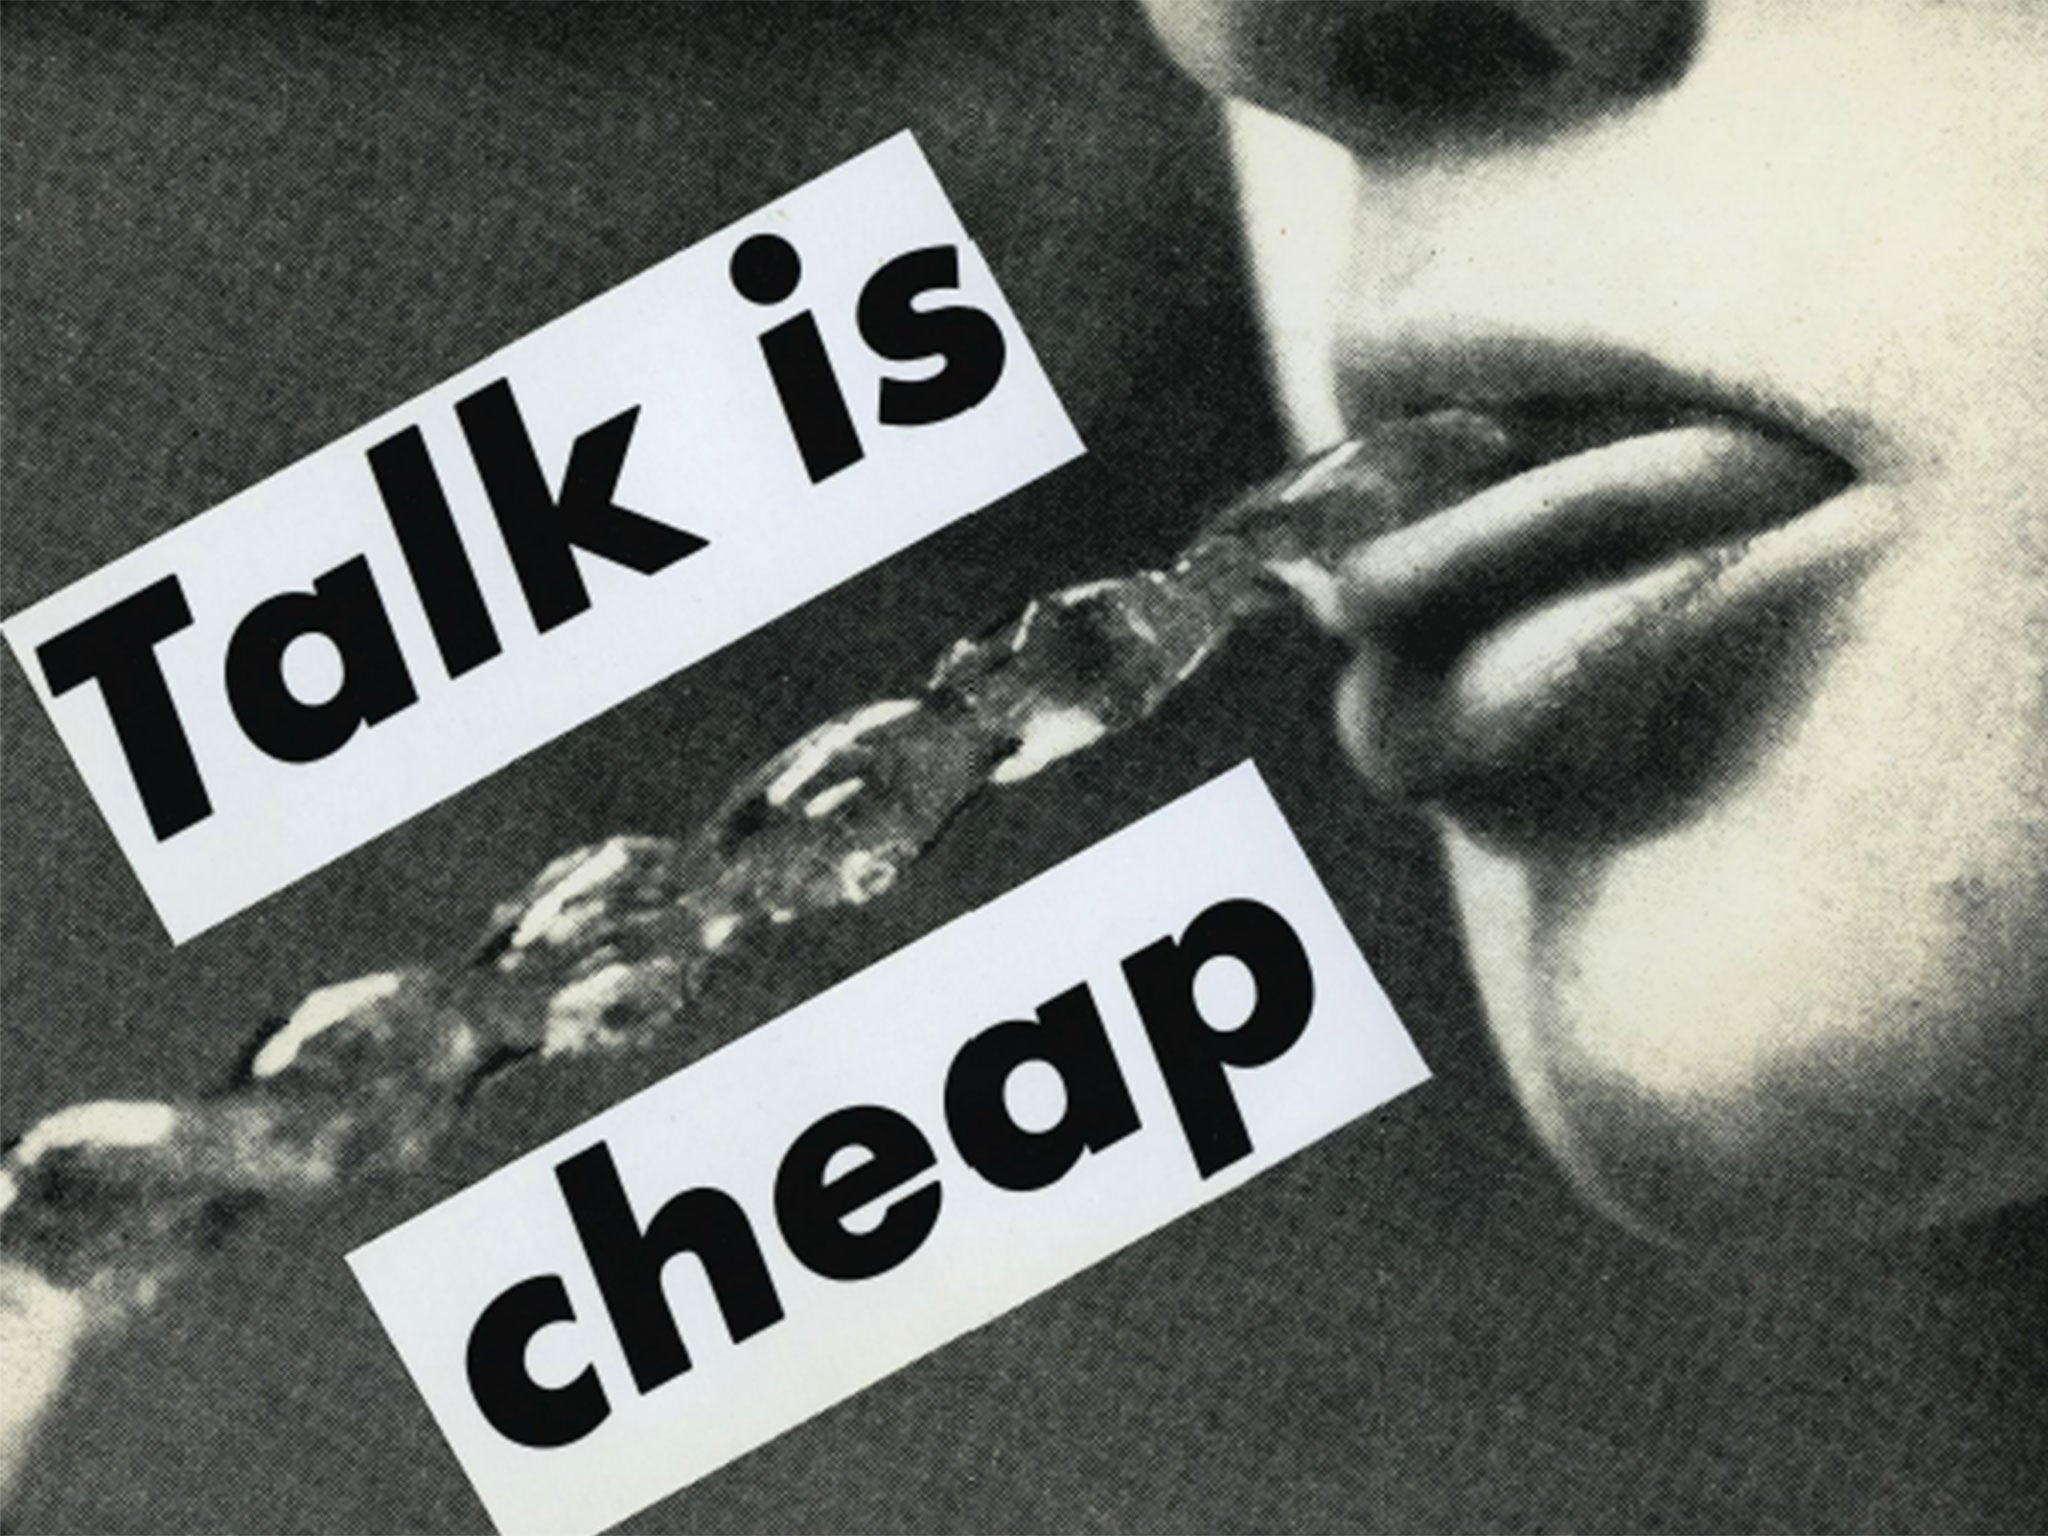 ‘Talk Is Cheap’ (1985) by Barbara Kruger